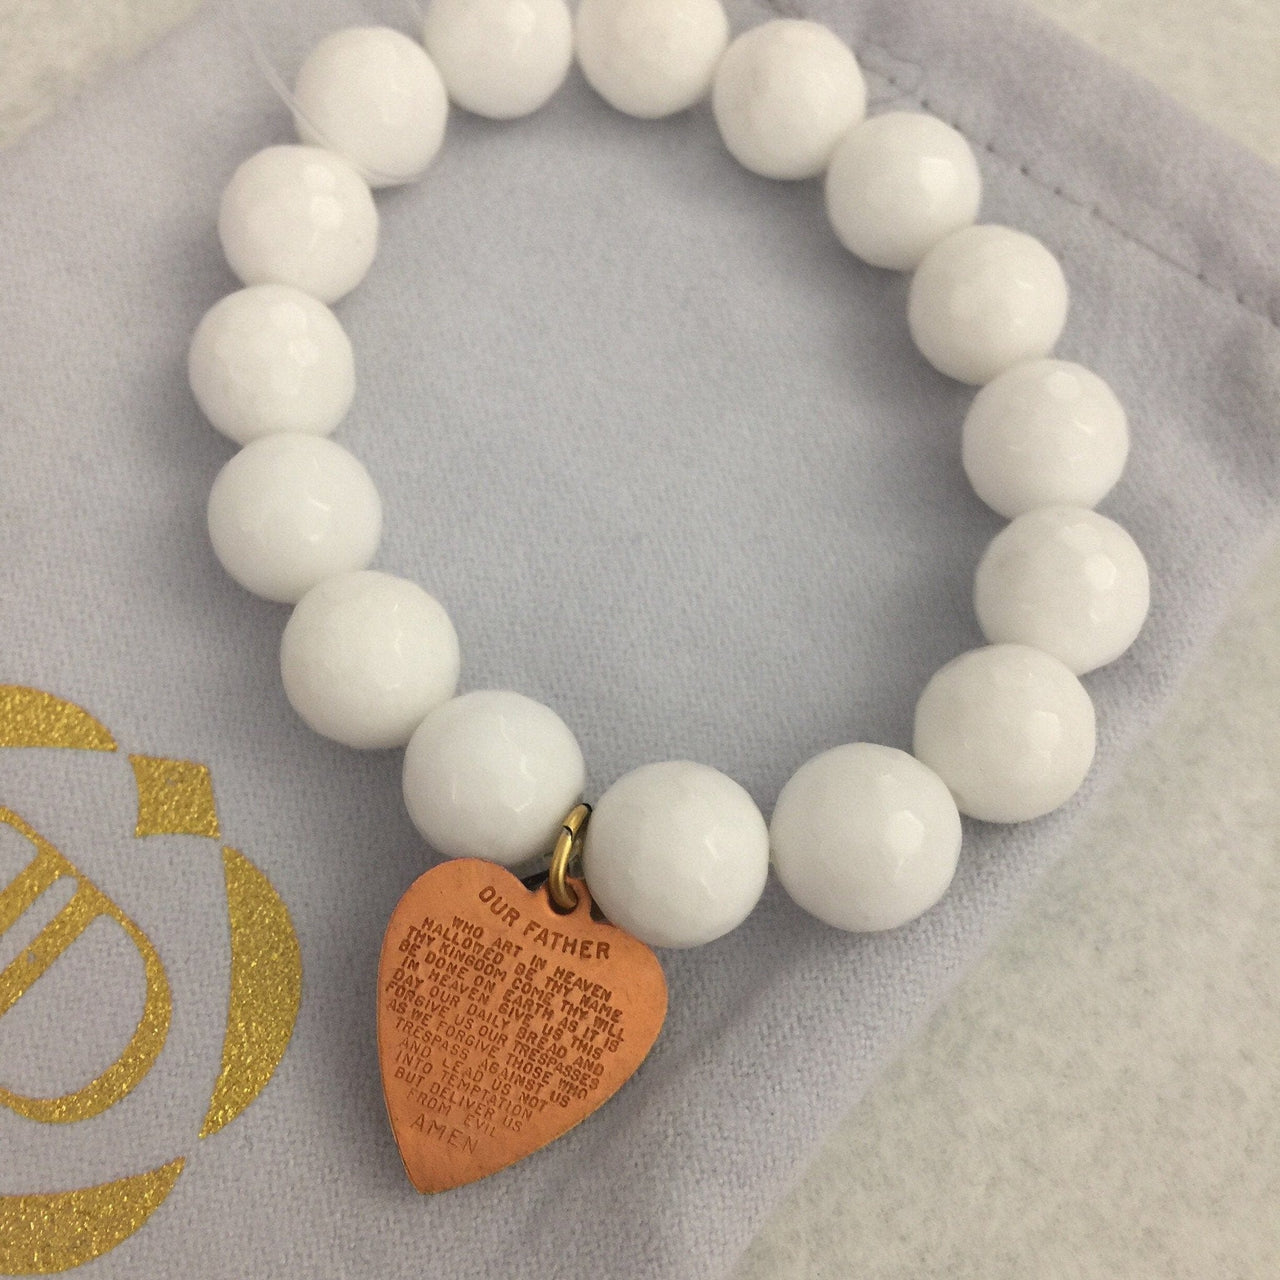 BLESSINGS BRACELETS Blessings in Disguise Bracelet White w copper our Father heart